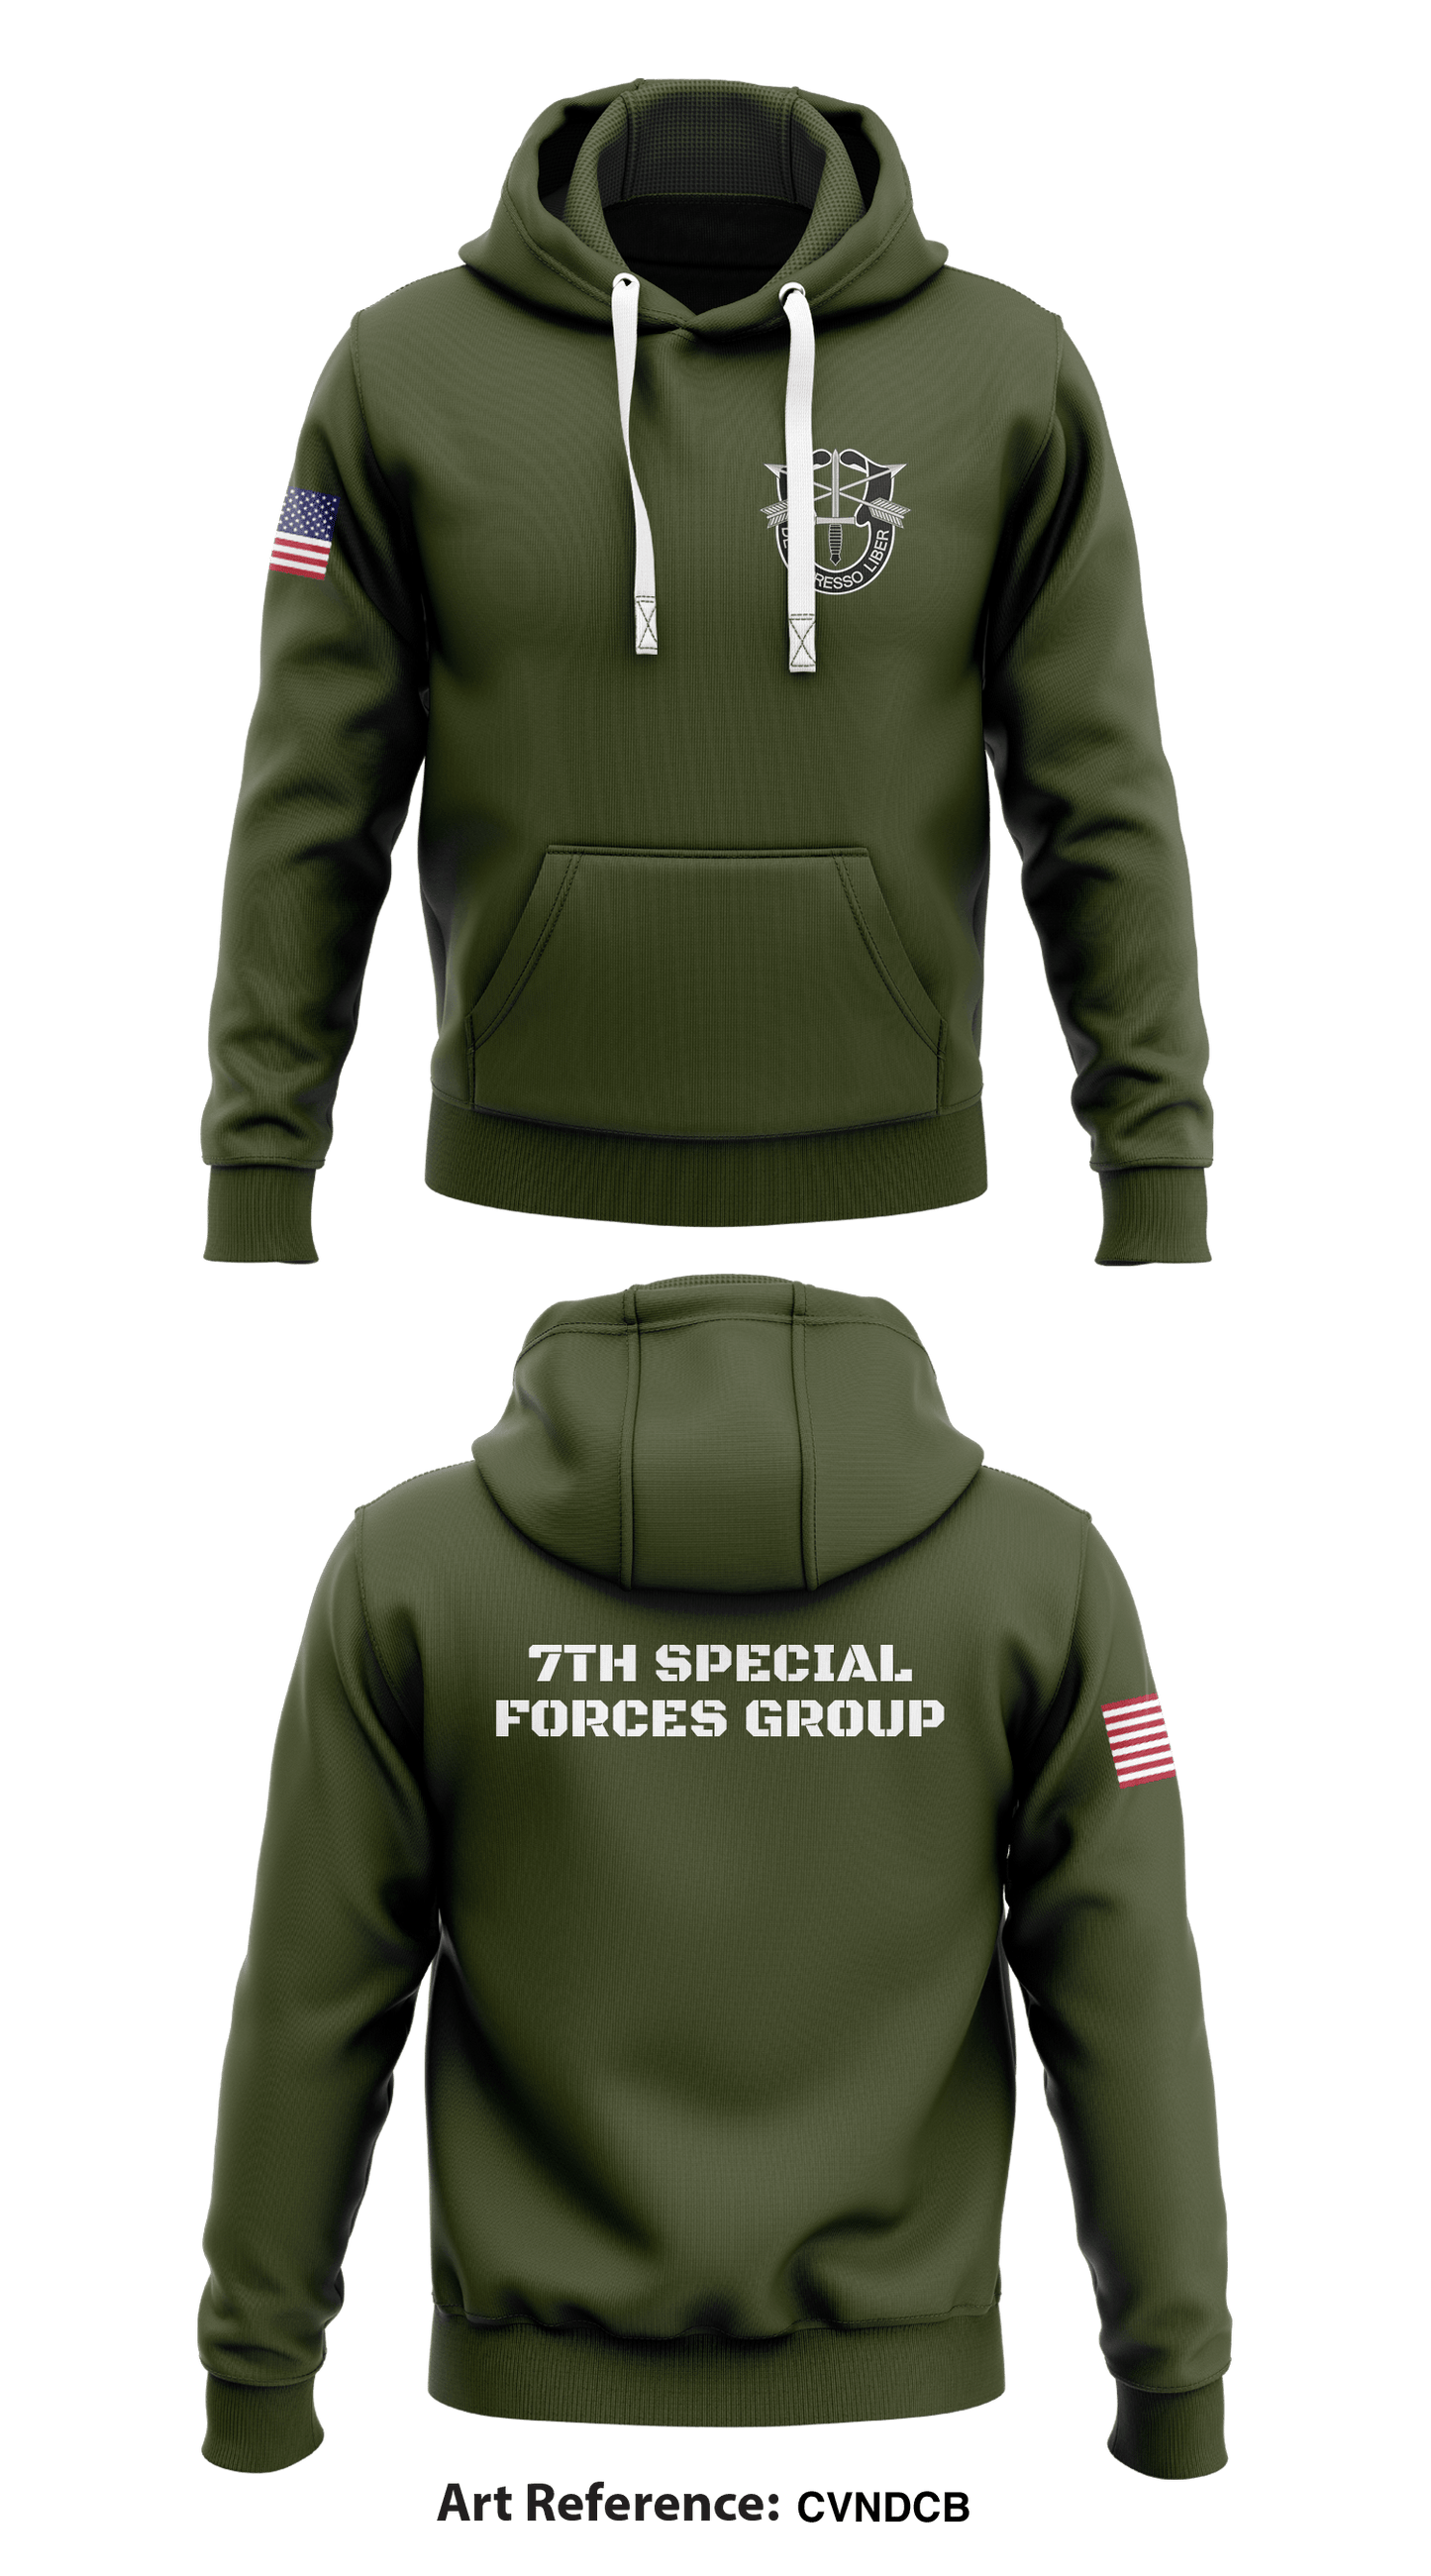 7th Special Forces Group Store 1 Core Men's Hooded Performance Sweatshirt - cVnDcb